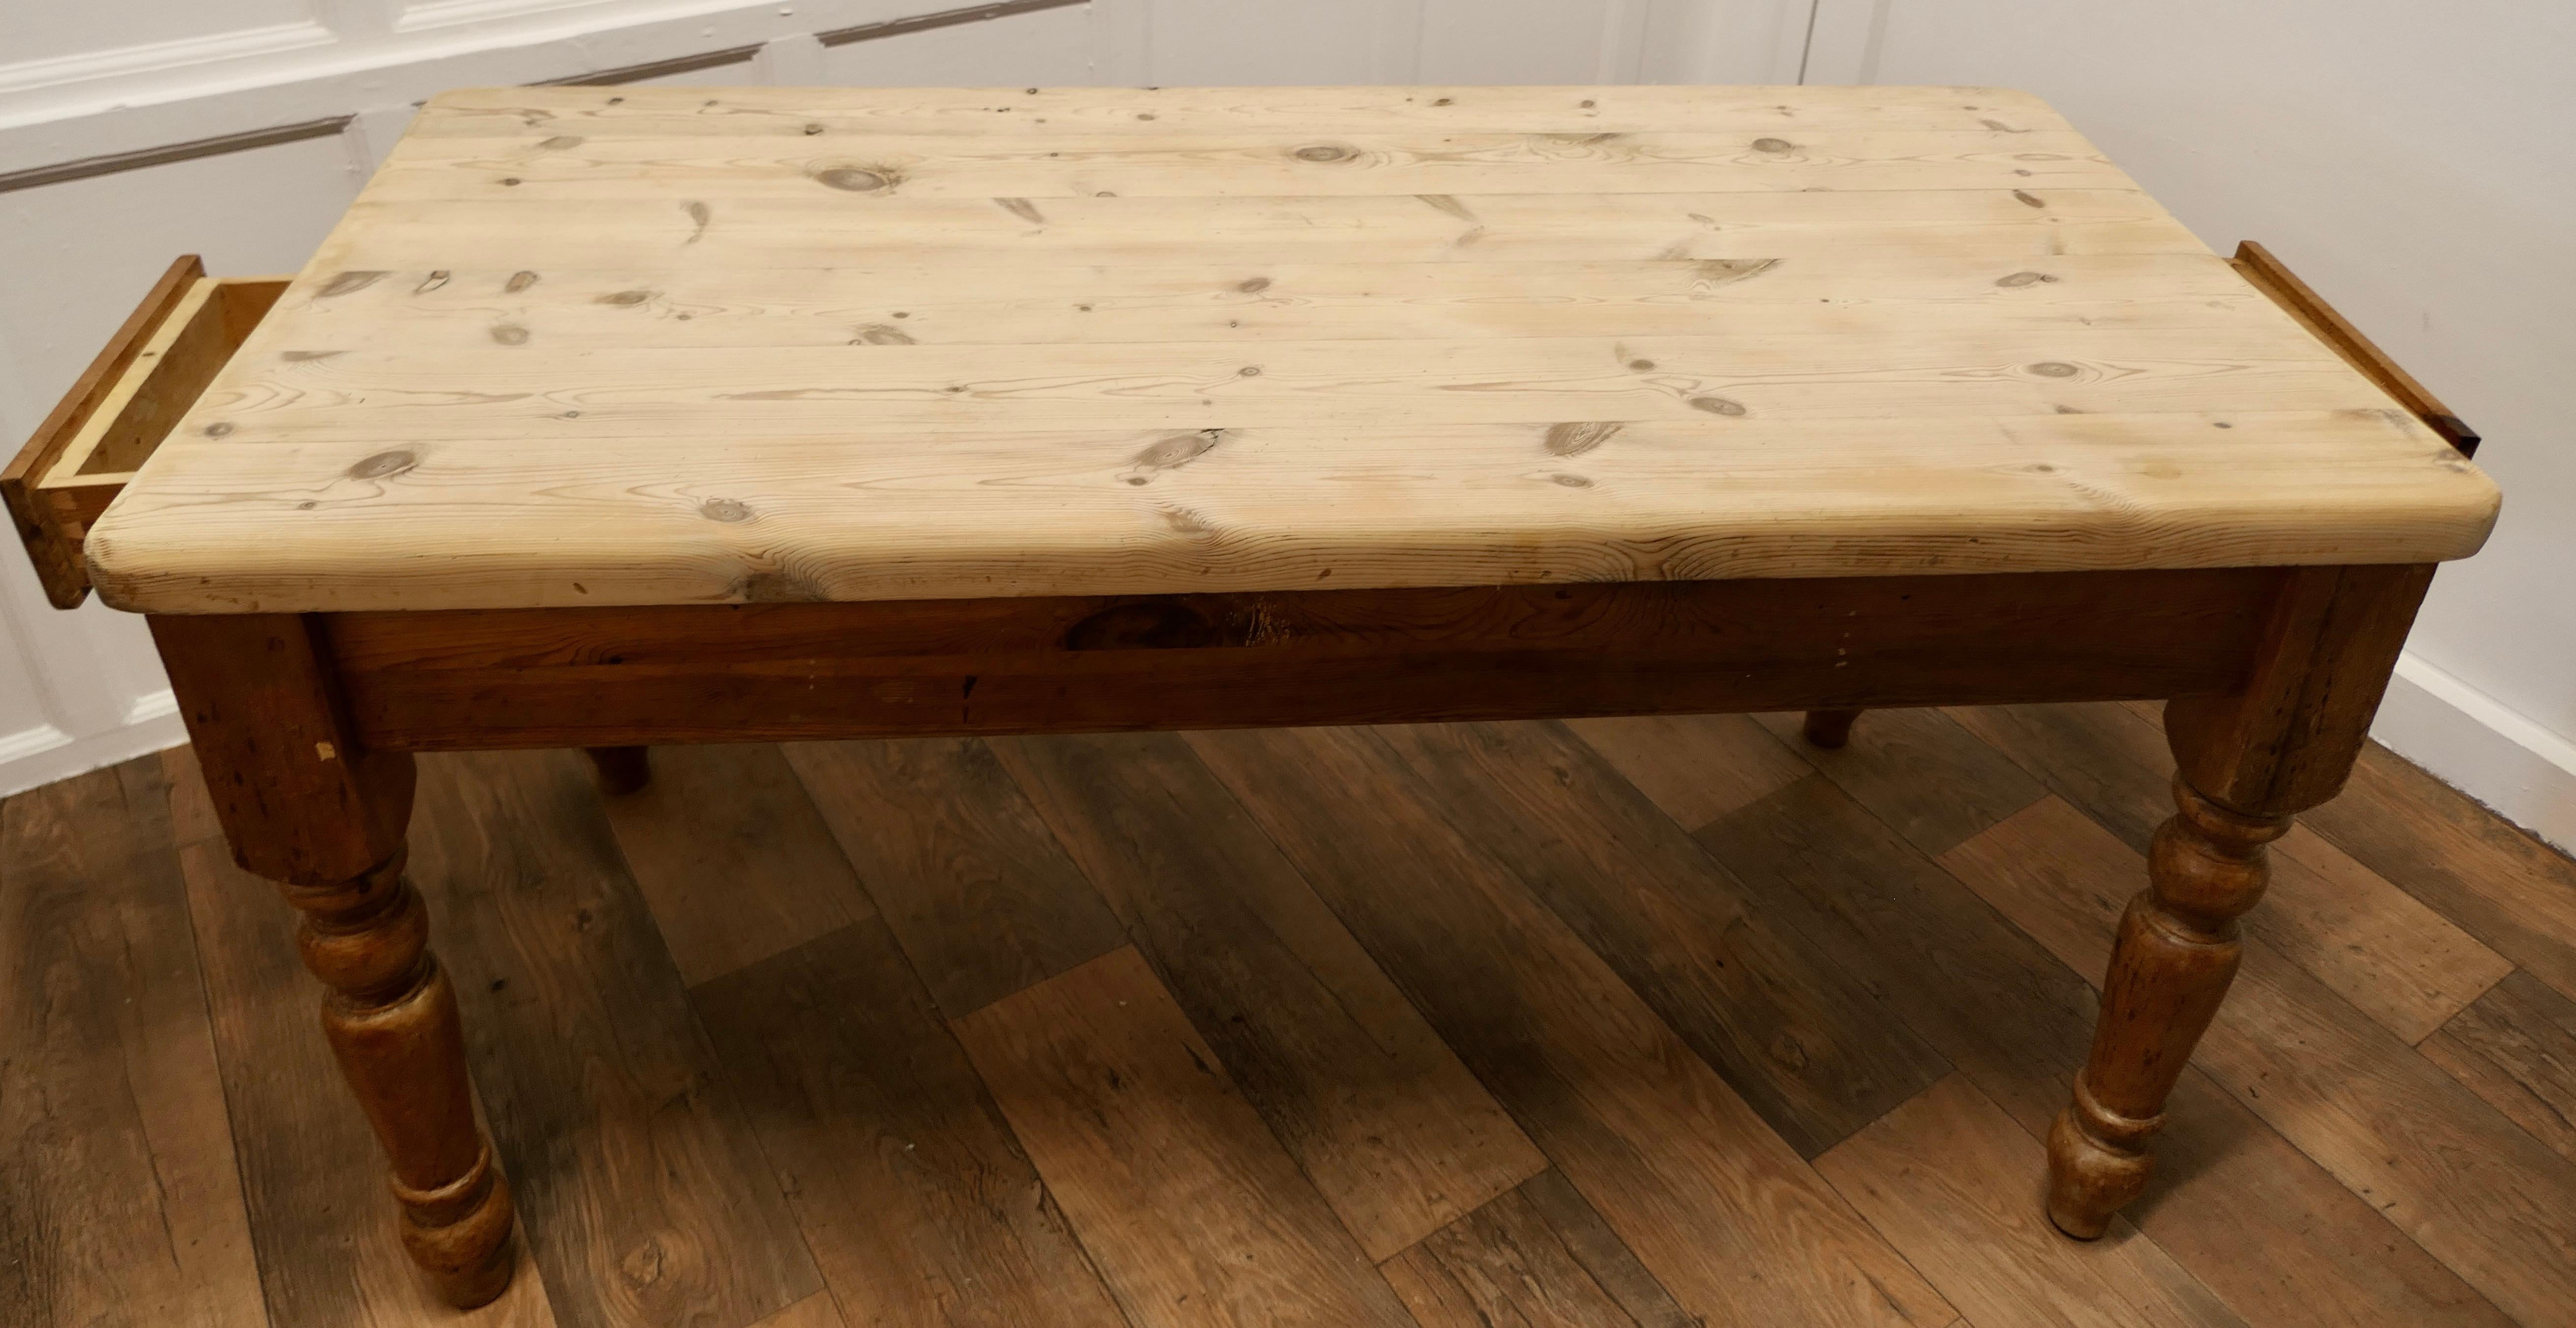 6 Seater thick top farmhouse pine table.

This is a good Rustic Farmhouse table, it has a thick top which has been cleaned back to the wood, if required we can have the top polished, the table has chunky turned legs and a drawer at each end

The